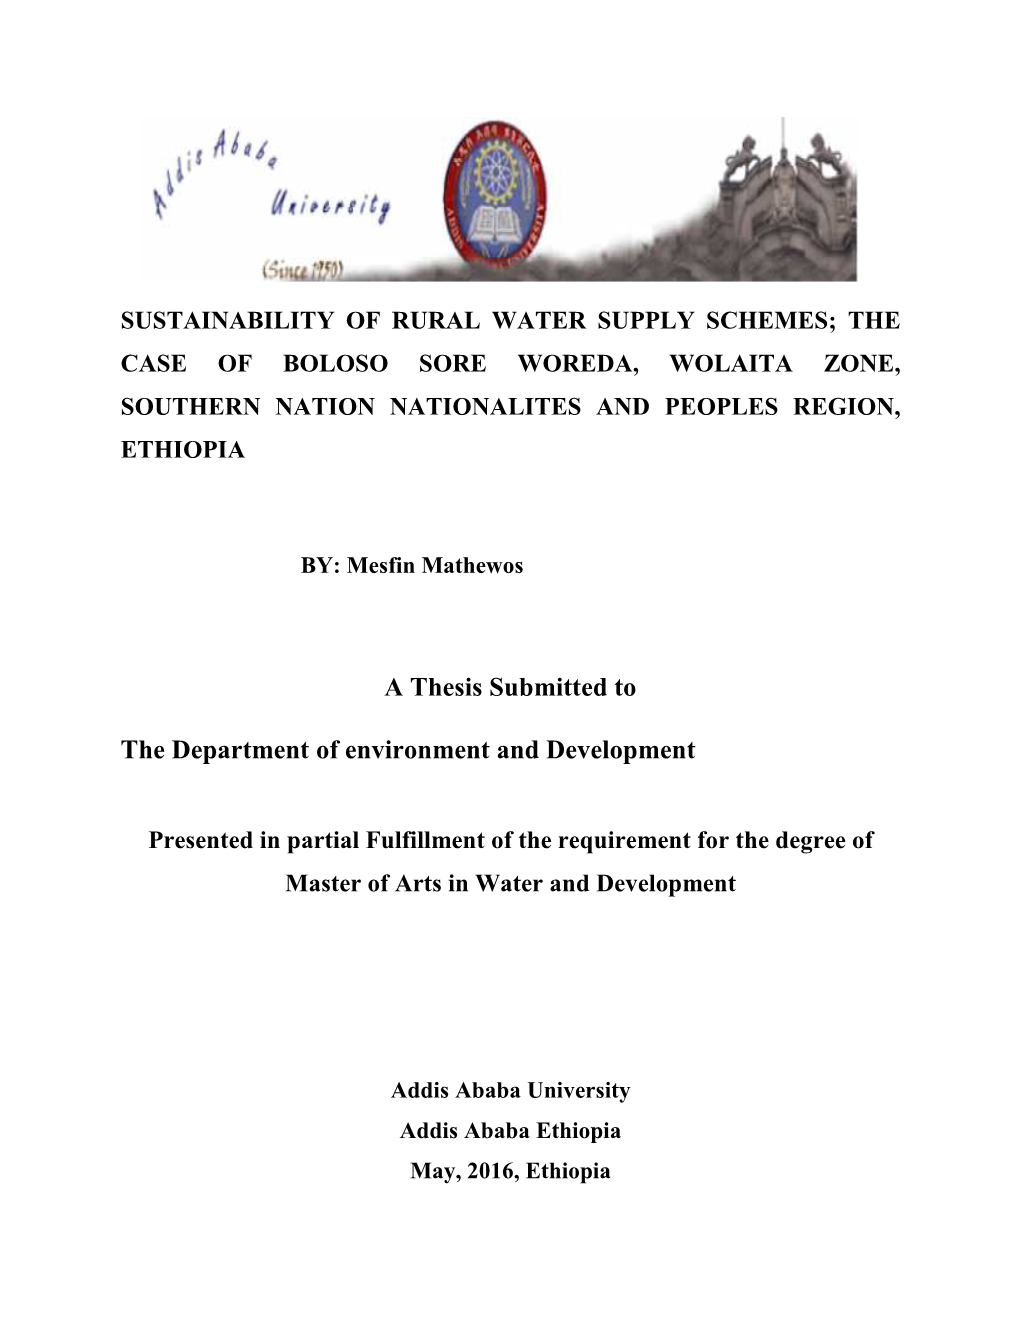 A Thesis Submitted to the Department of Environment and Development